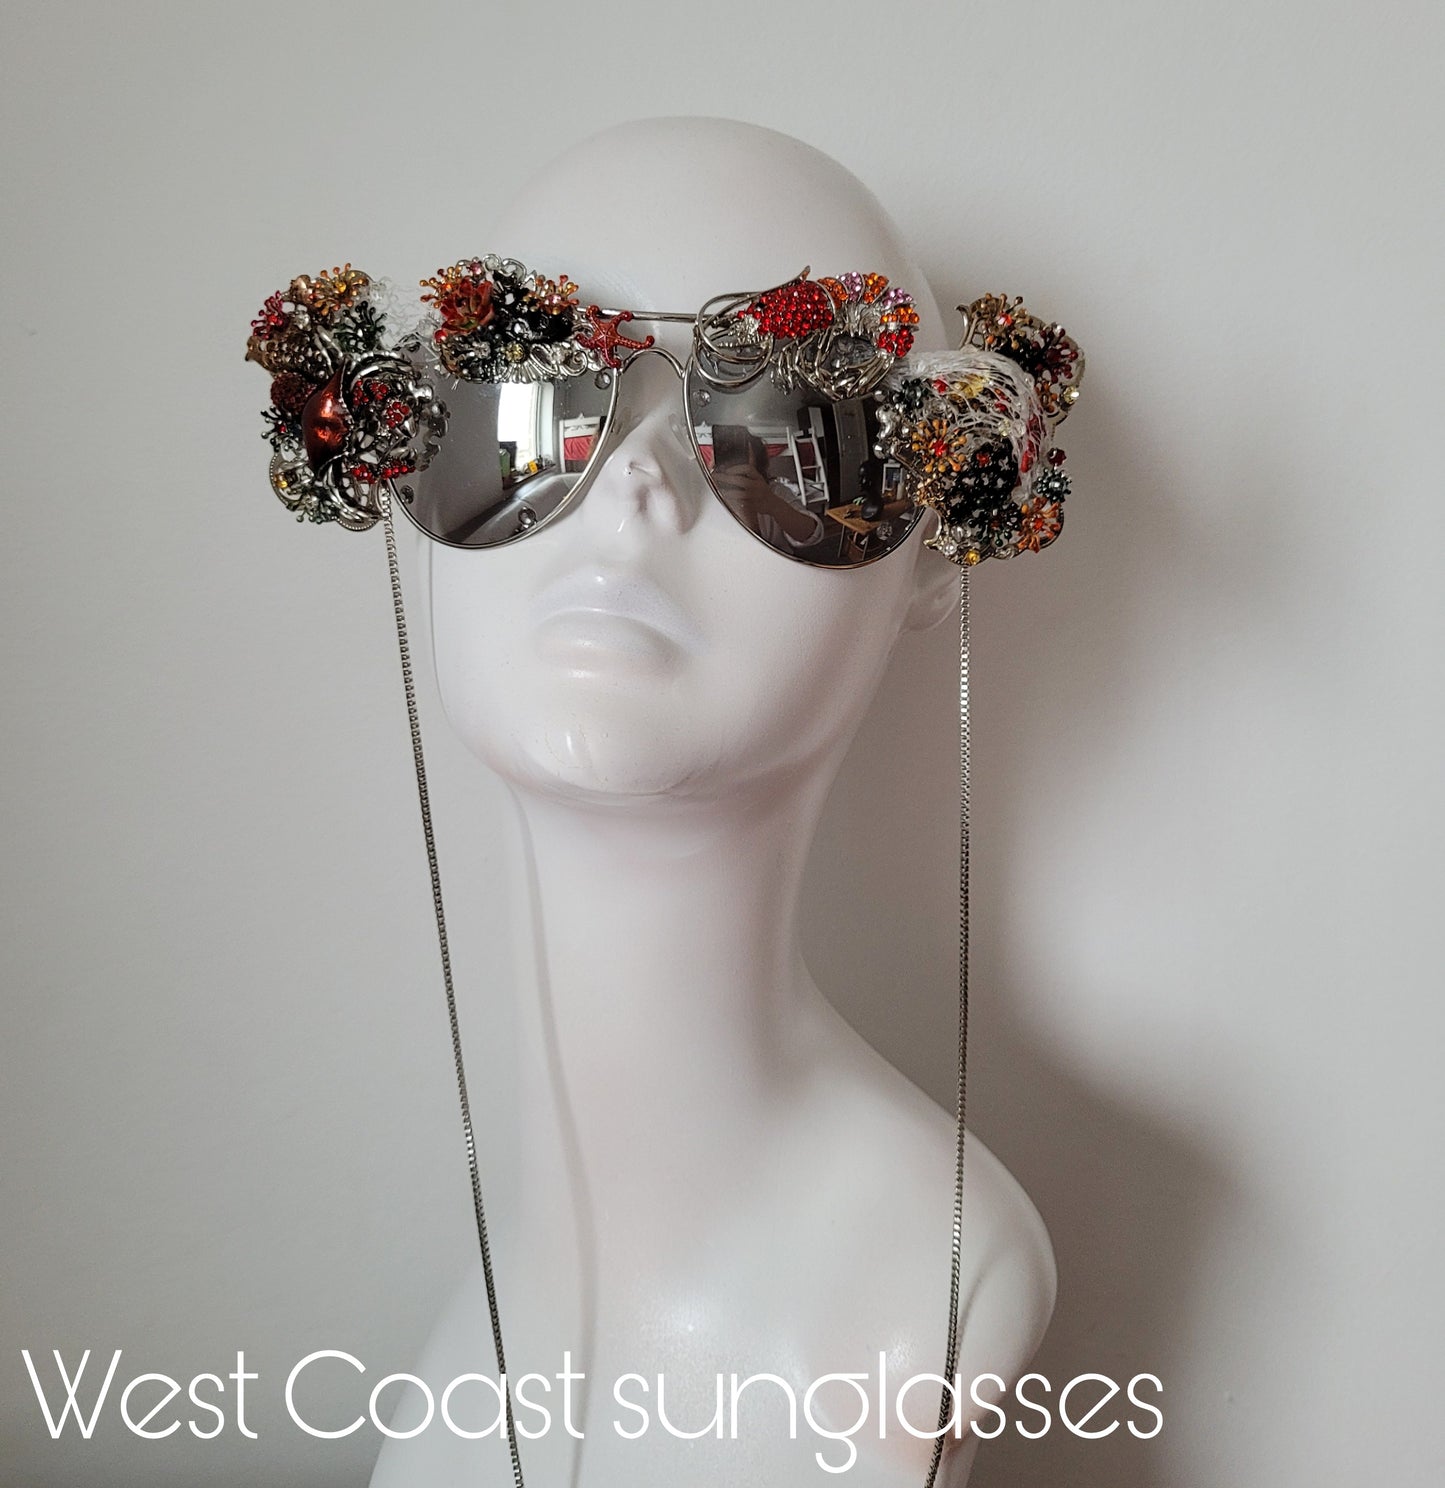 Shifting Depths collection: the West Coast sculptural sunglasses